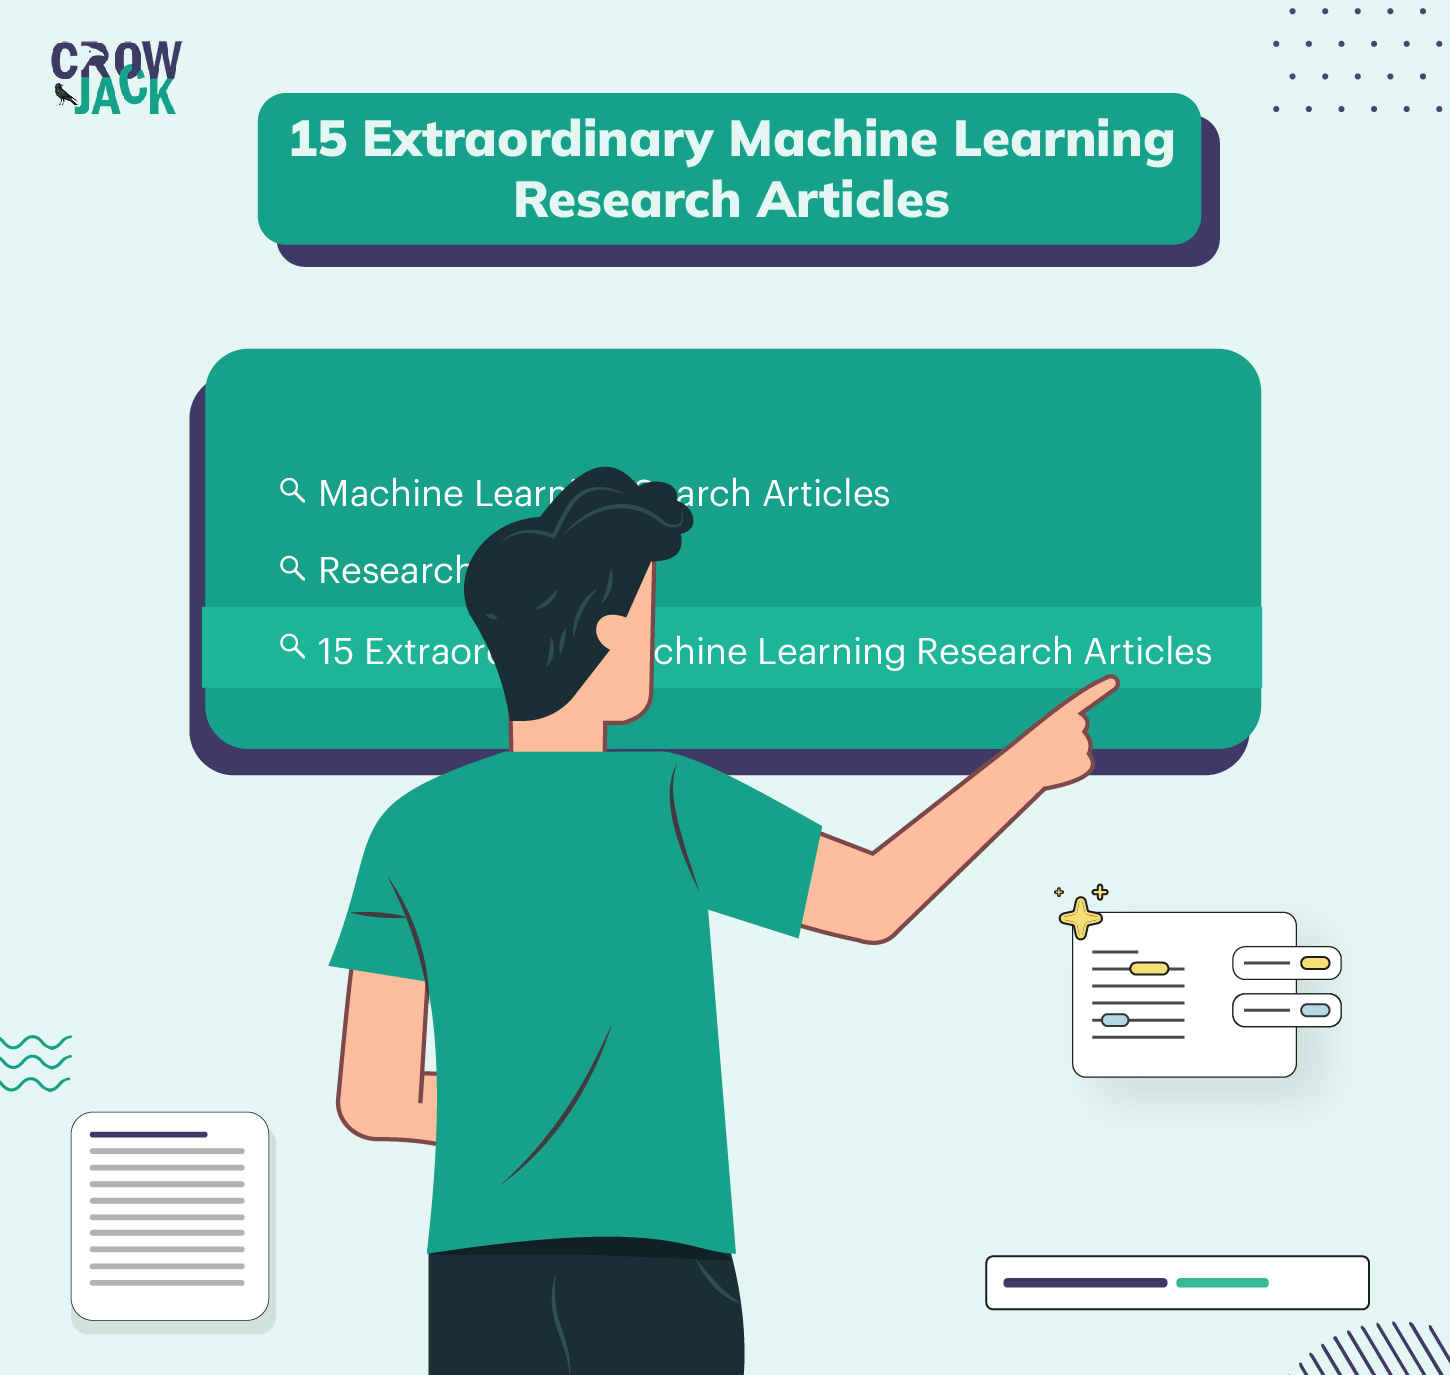 15 Extraordinary Machine Learning Research Articles